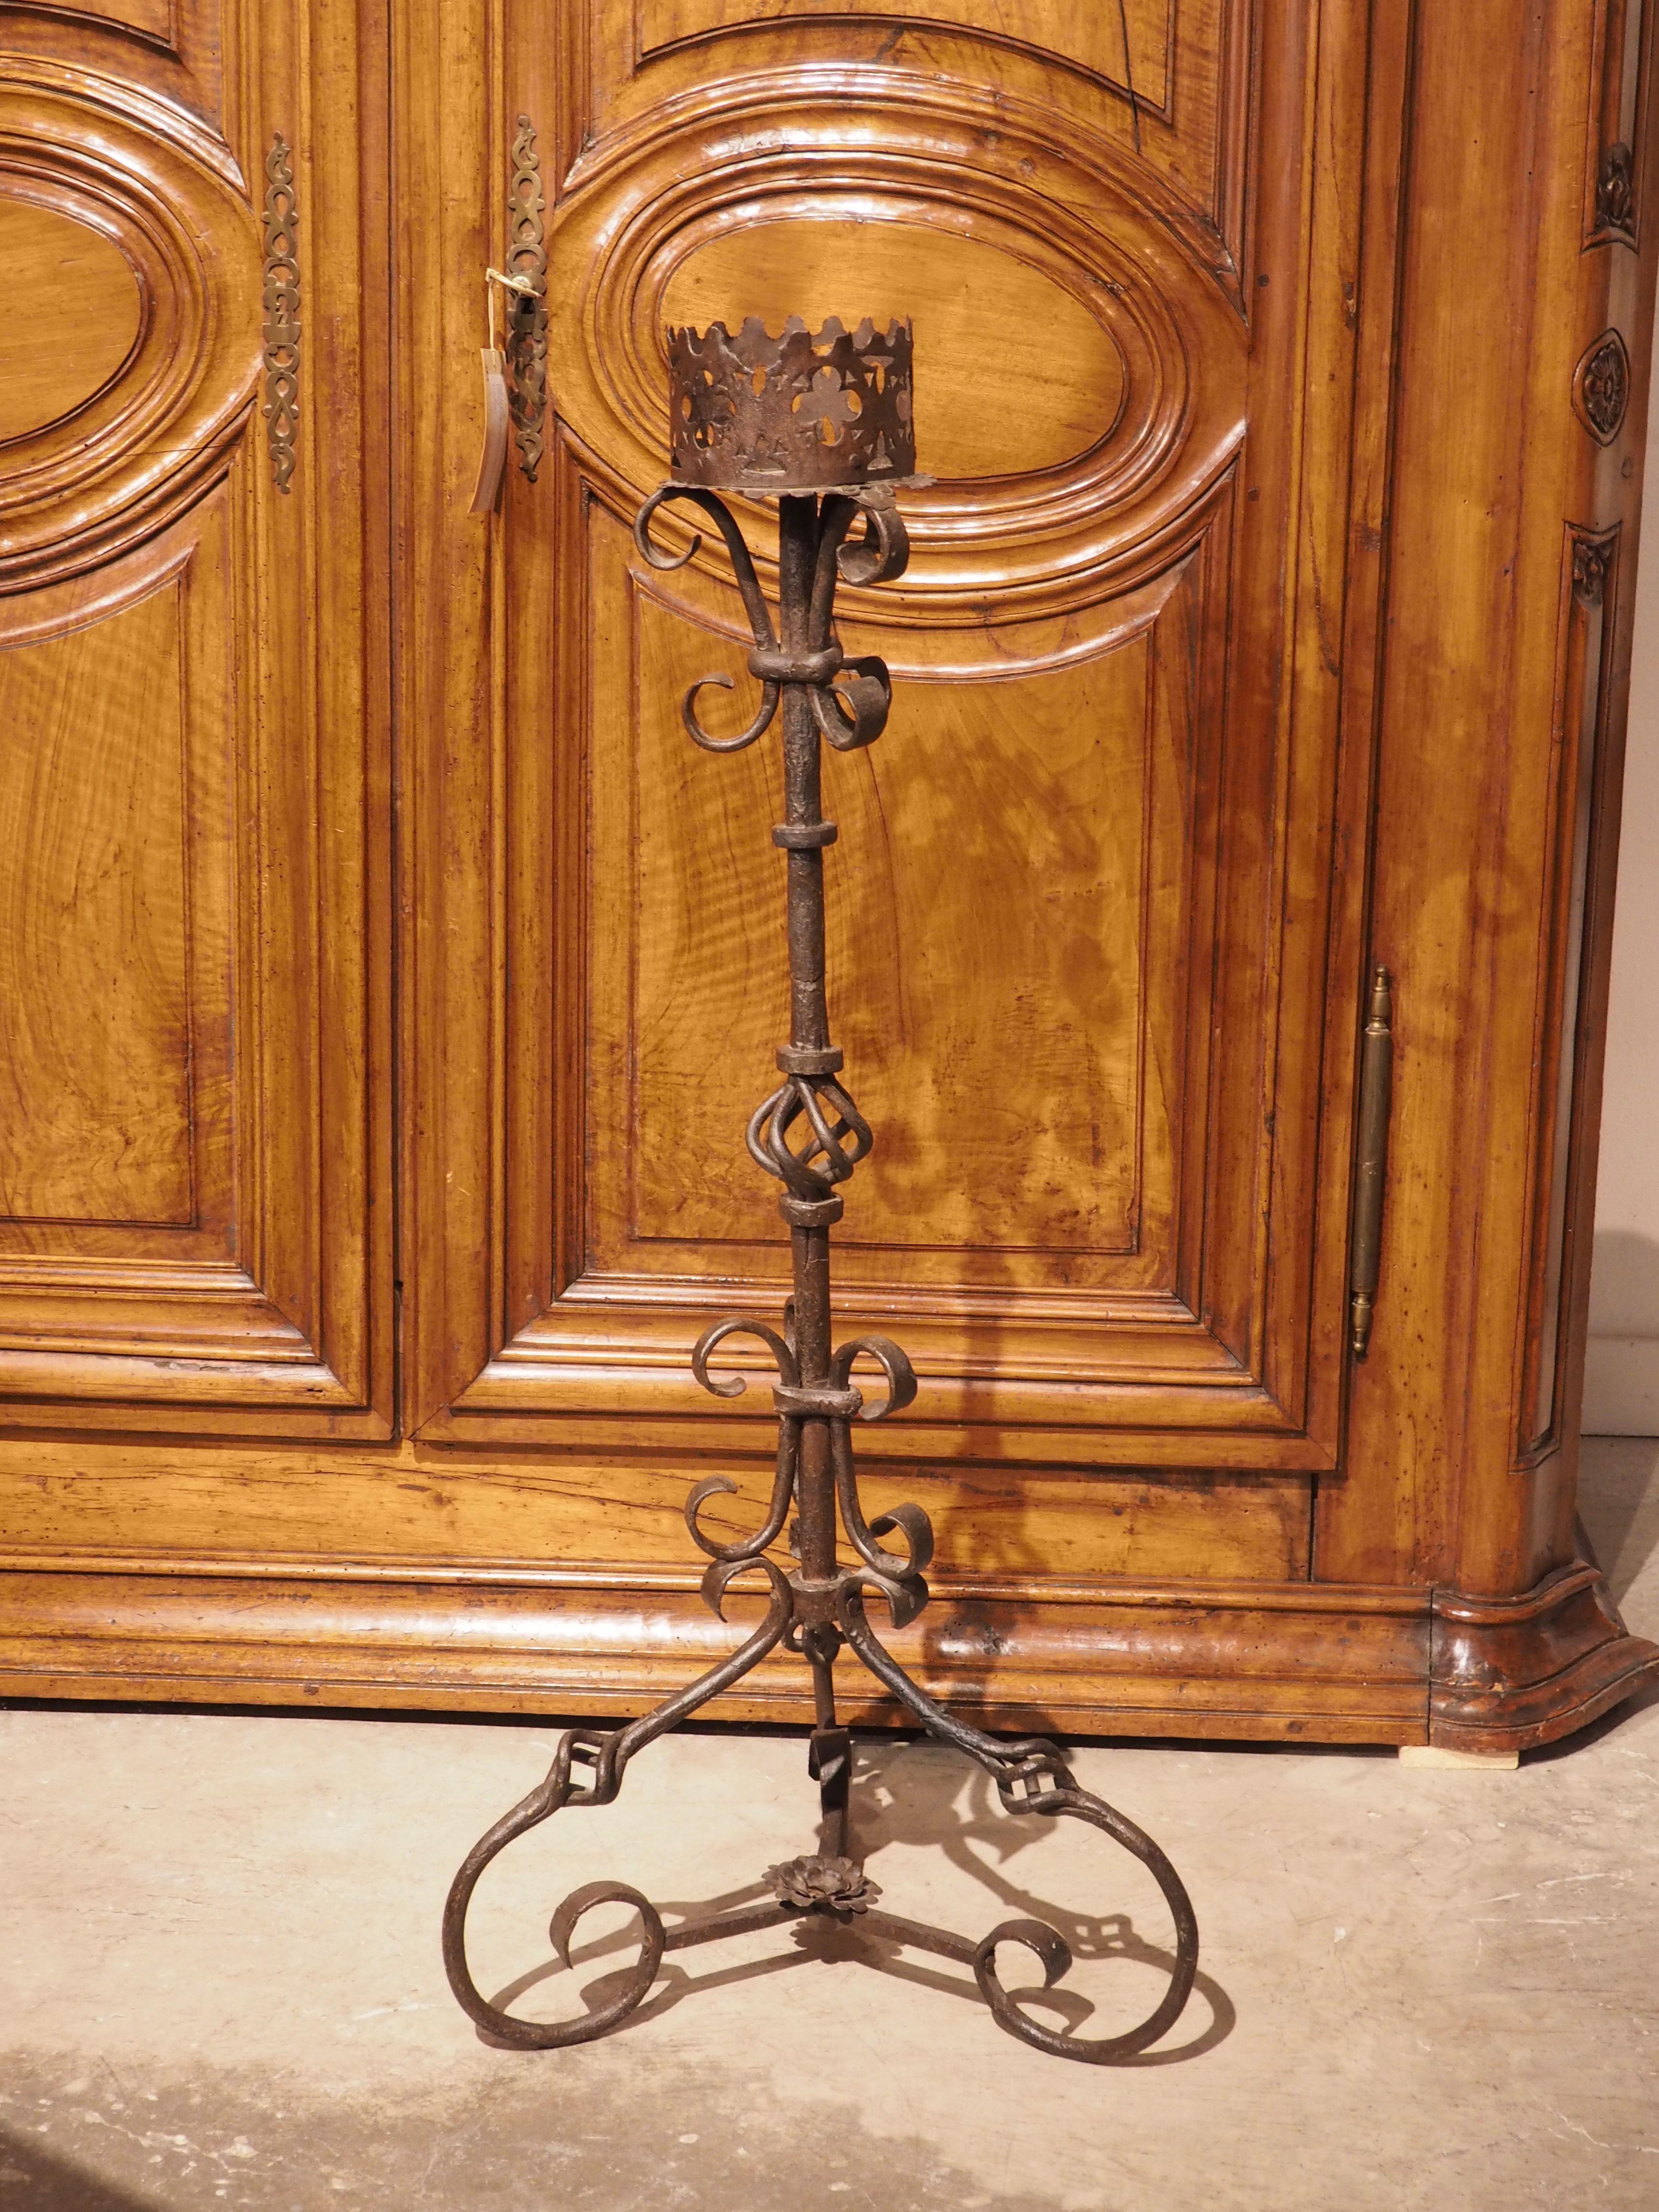 In the Middle Ages, servants often held lit torches in their hands, allowing the flame to brighten the room. During the Renaissance period the torchere was introduced, becoming a safer and more decorative technique of illumination. Our wrought iron